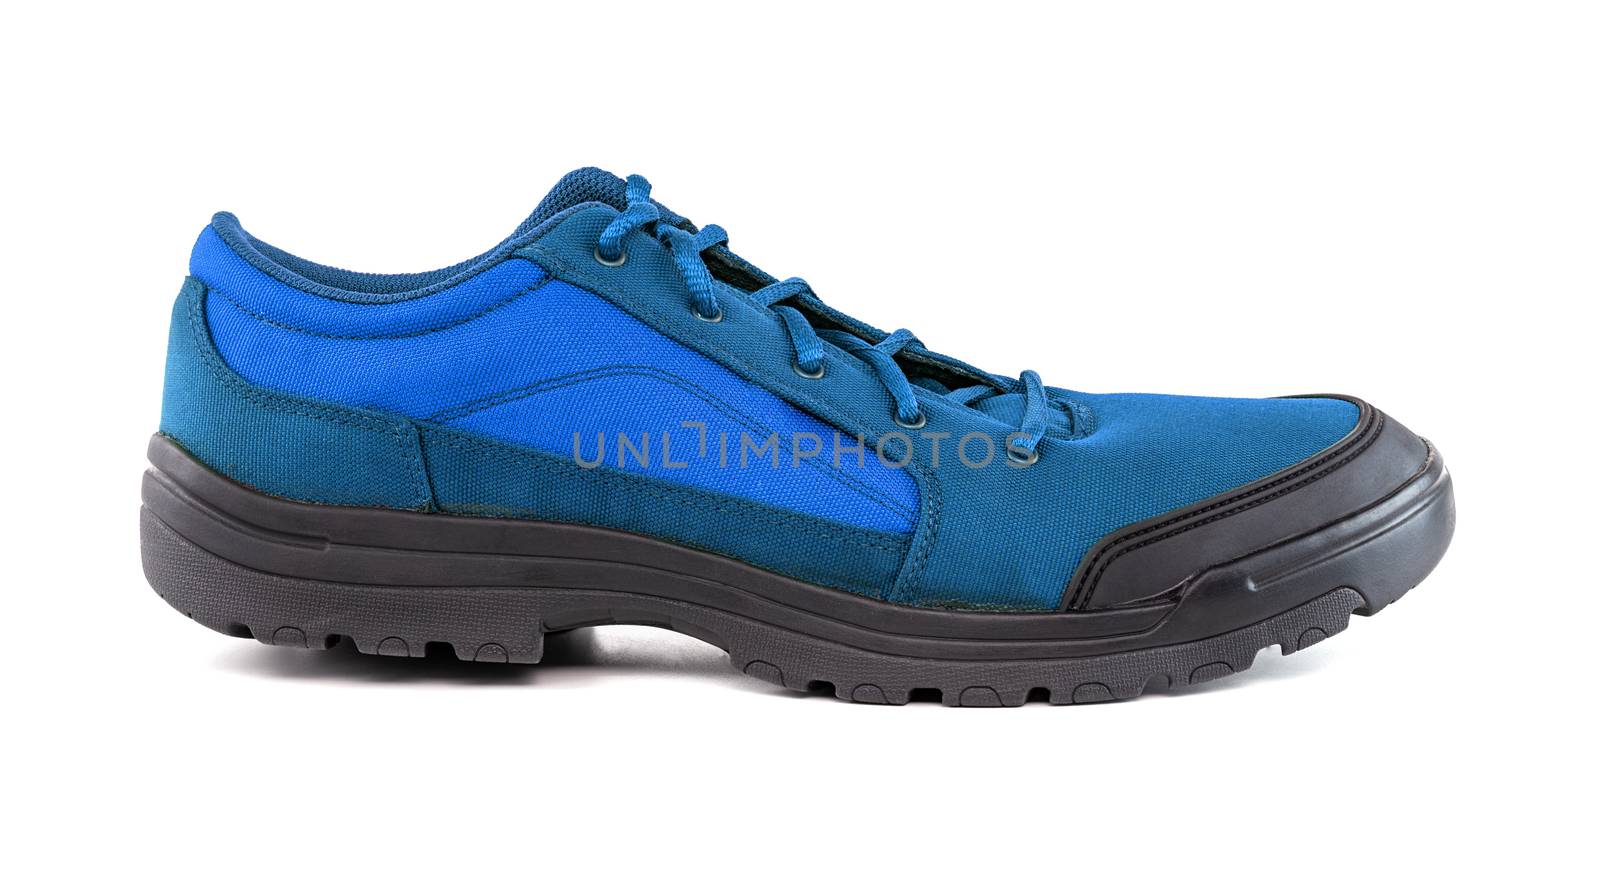 right cheap light blue hiking or hunting shoe isolated on white background, side view.